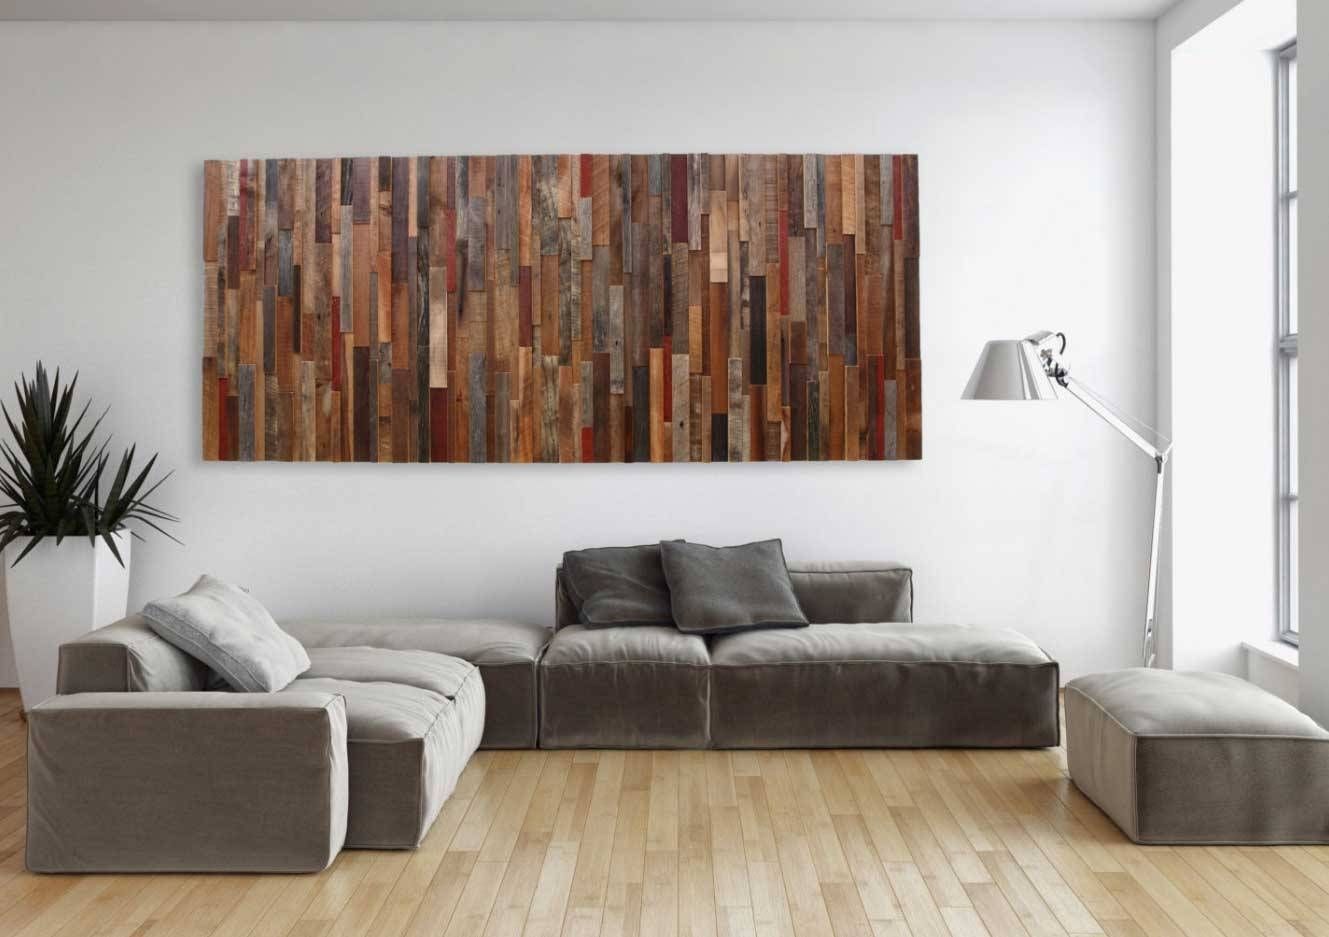 Oversized Wall Art Contemporary Sculpture Ideas | Home Interior For Most Popular Oversized Wall Art Contemporary (View 13 of 20)